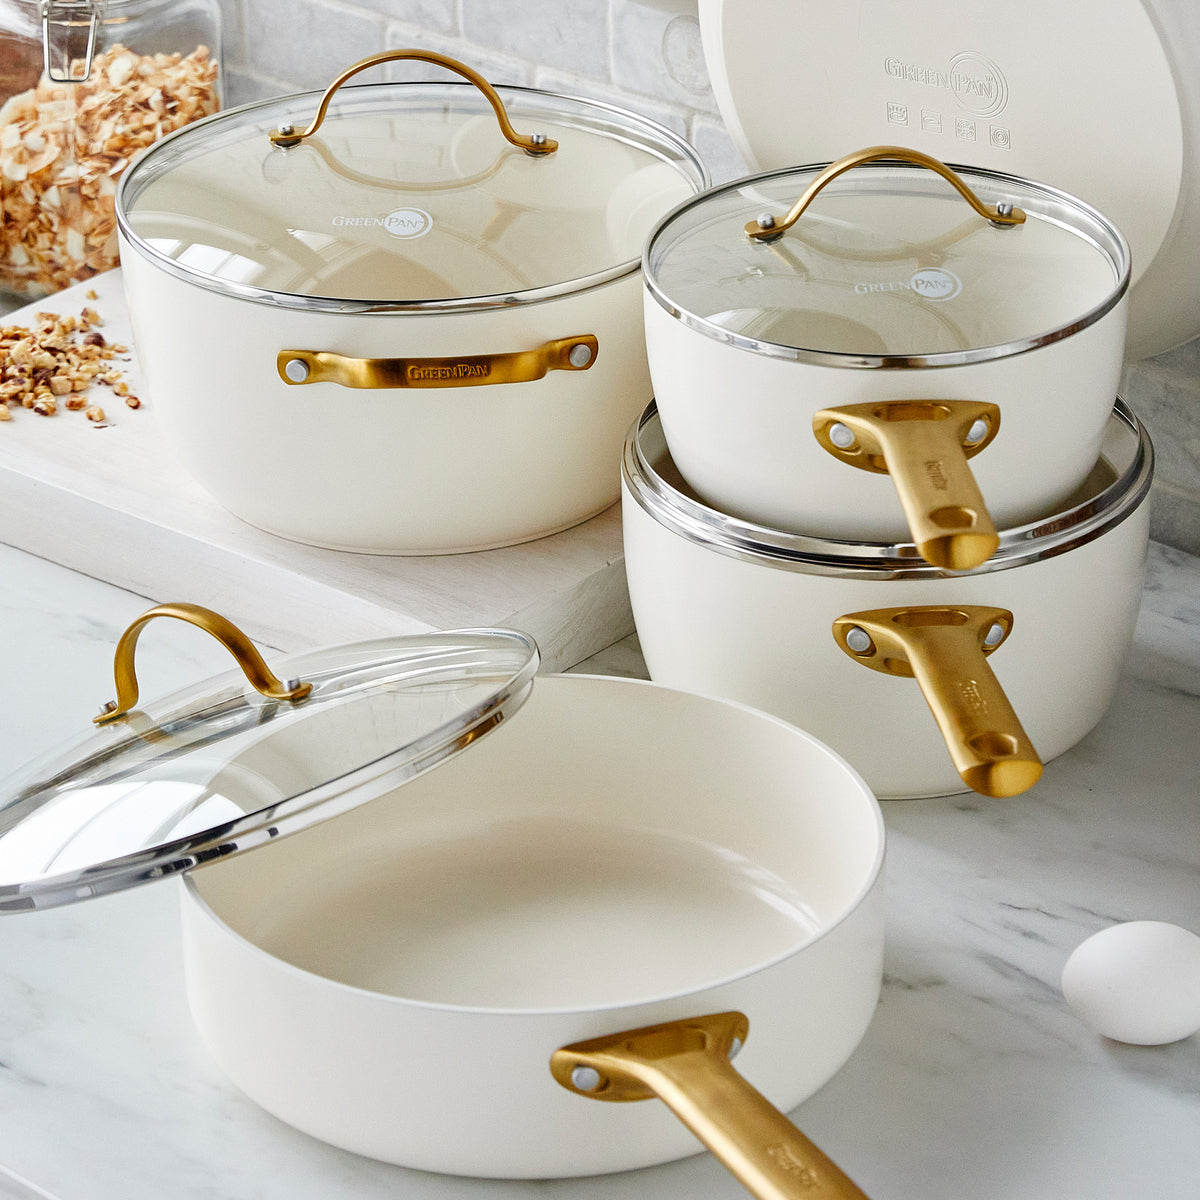 Reserve Ceramic Nonstick 10-Piece Cookware Set, Taupe with Gold-Tone